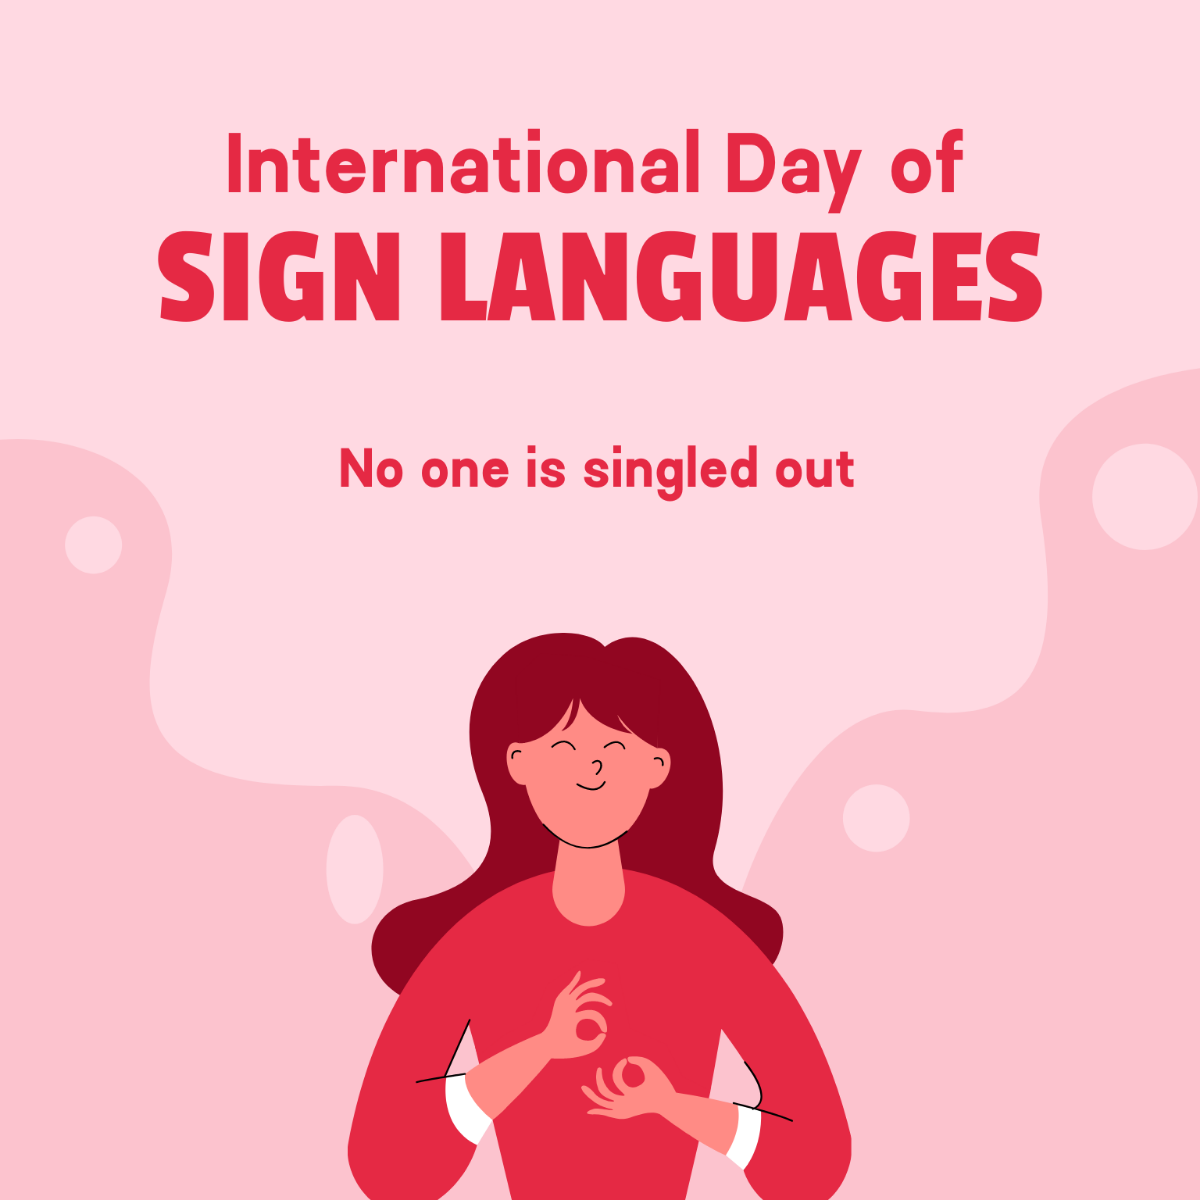 Free International Day of Sign Languages Poster Vector Template